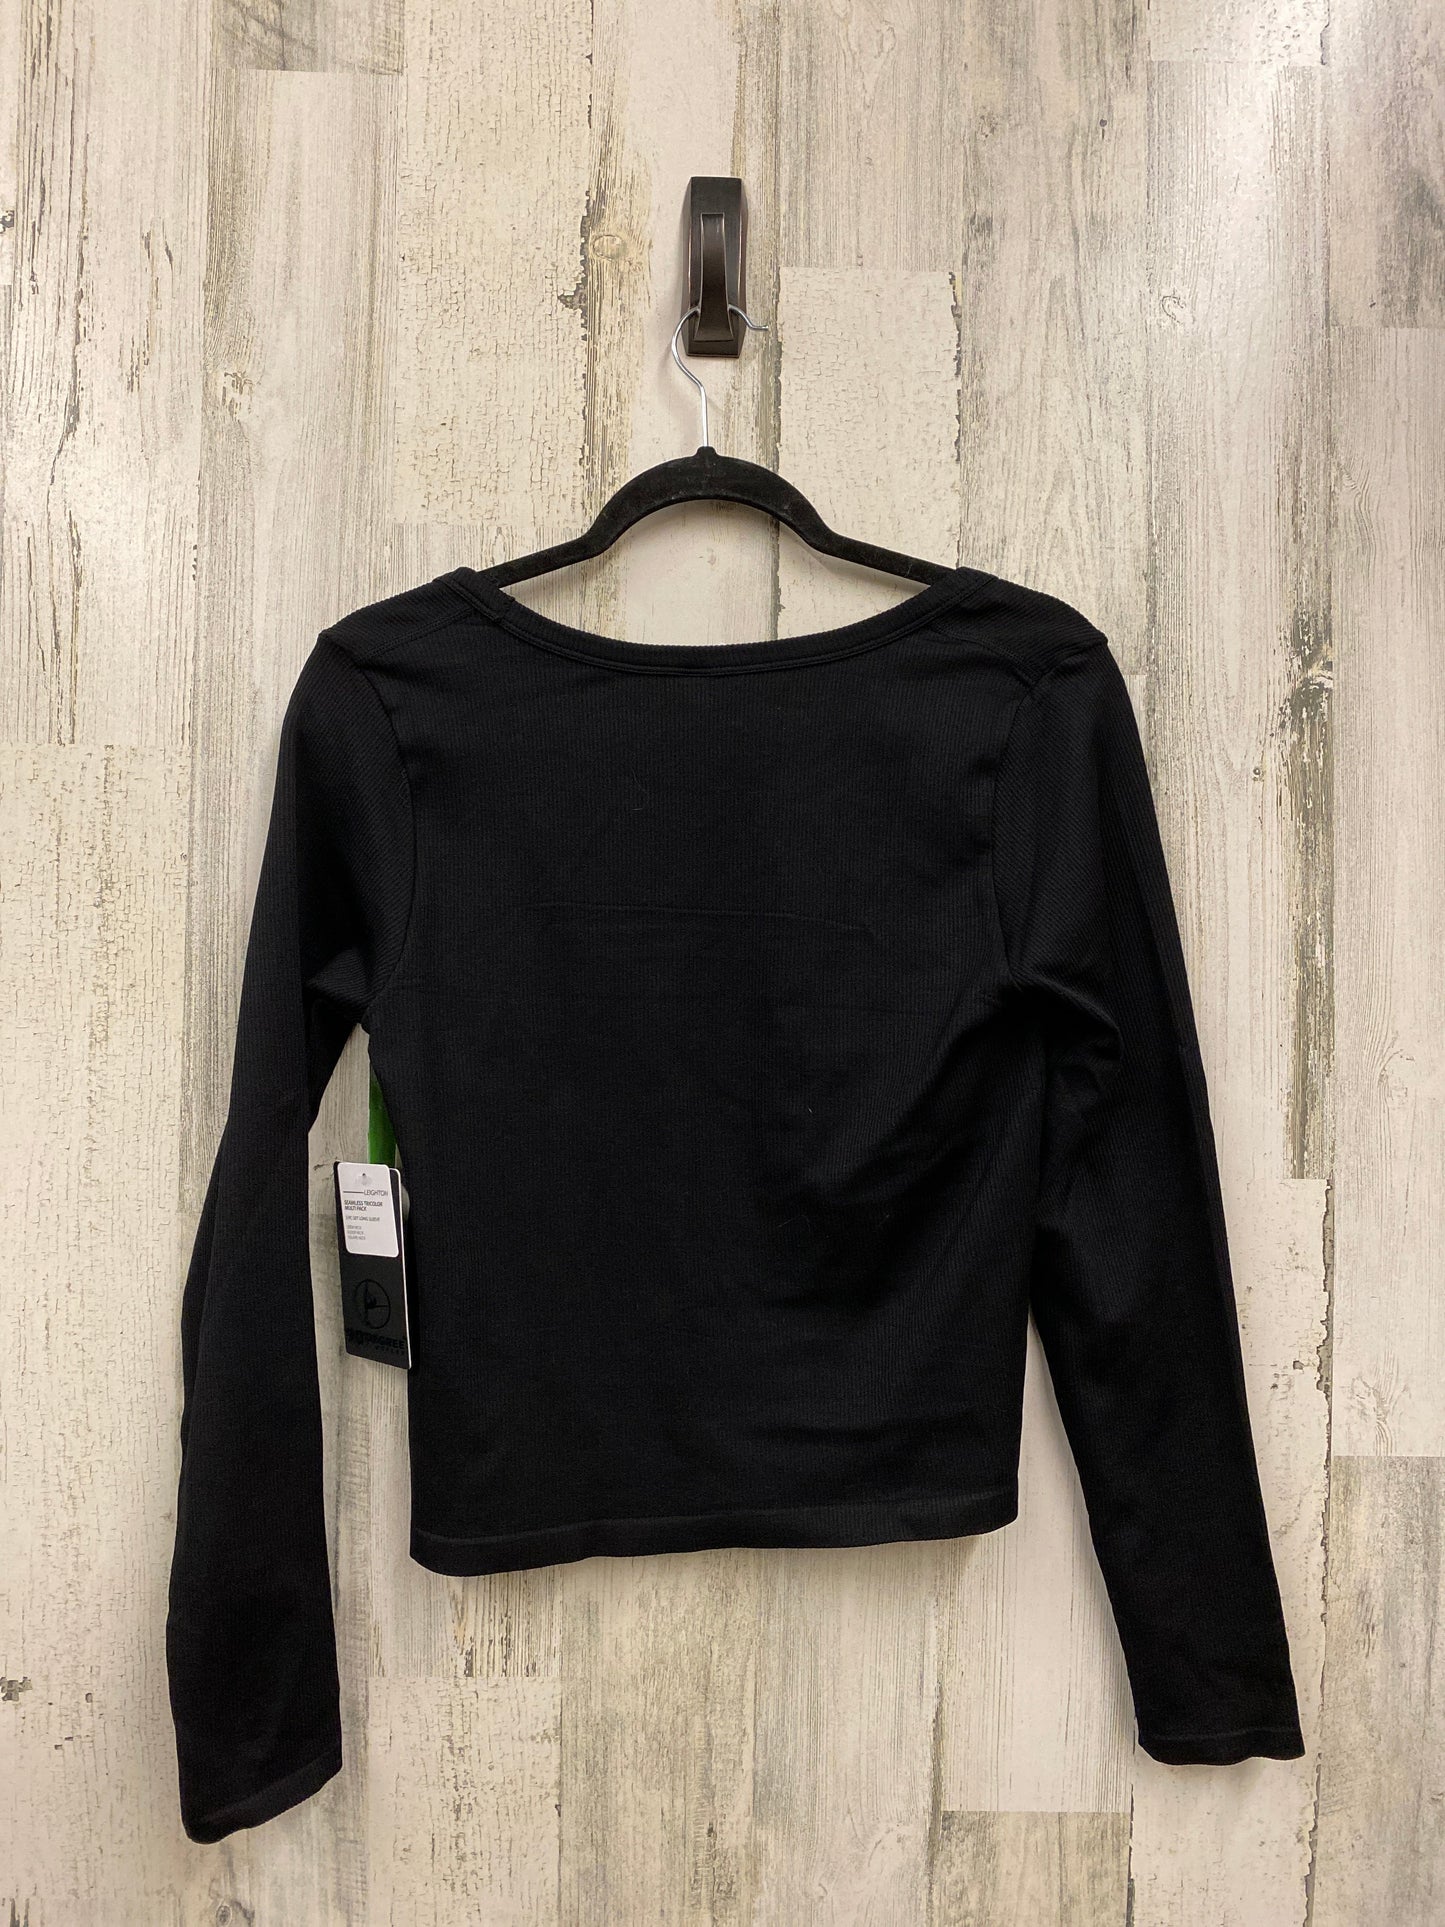 Top Long Sleeve By 90 Degrees By Reflex  Size: Xl